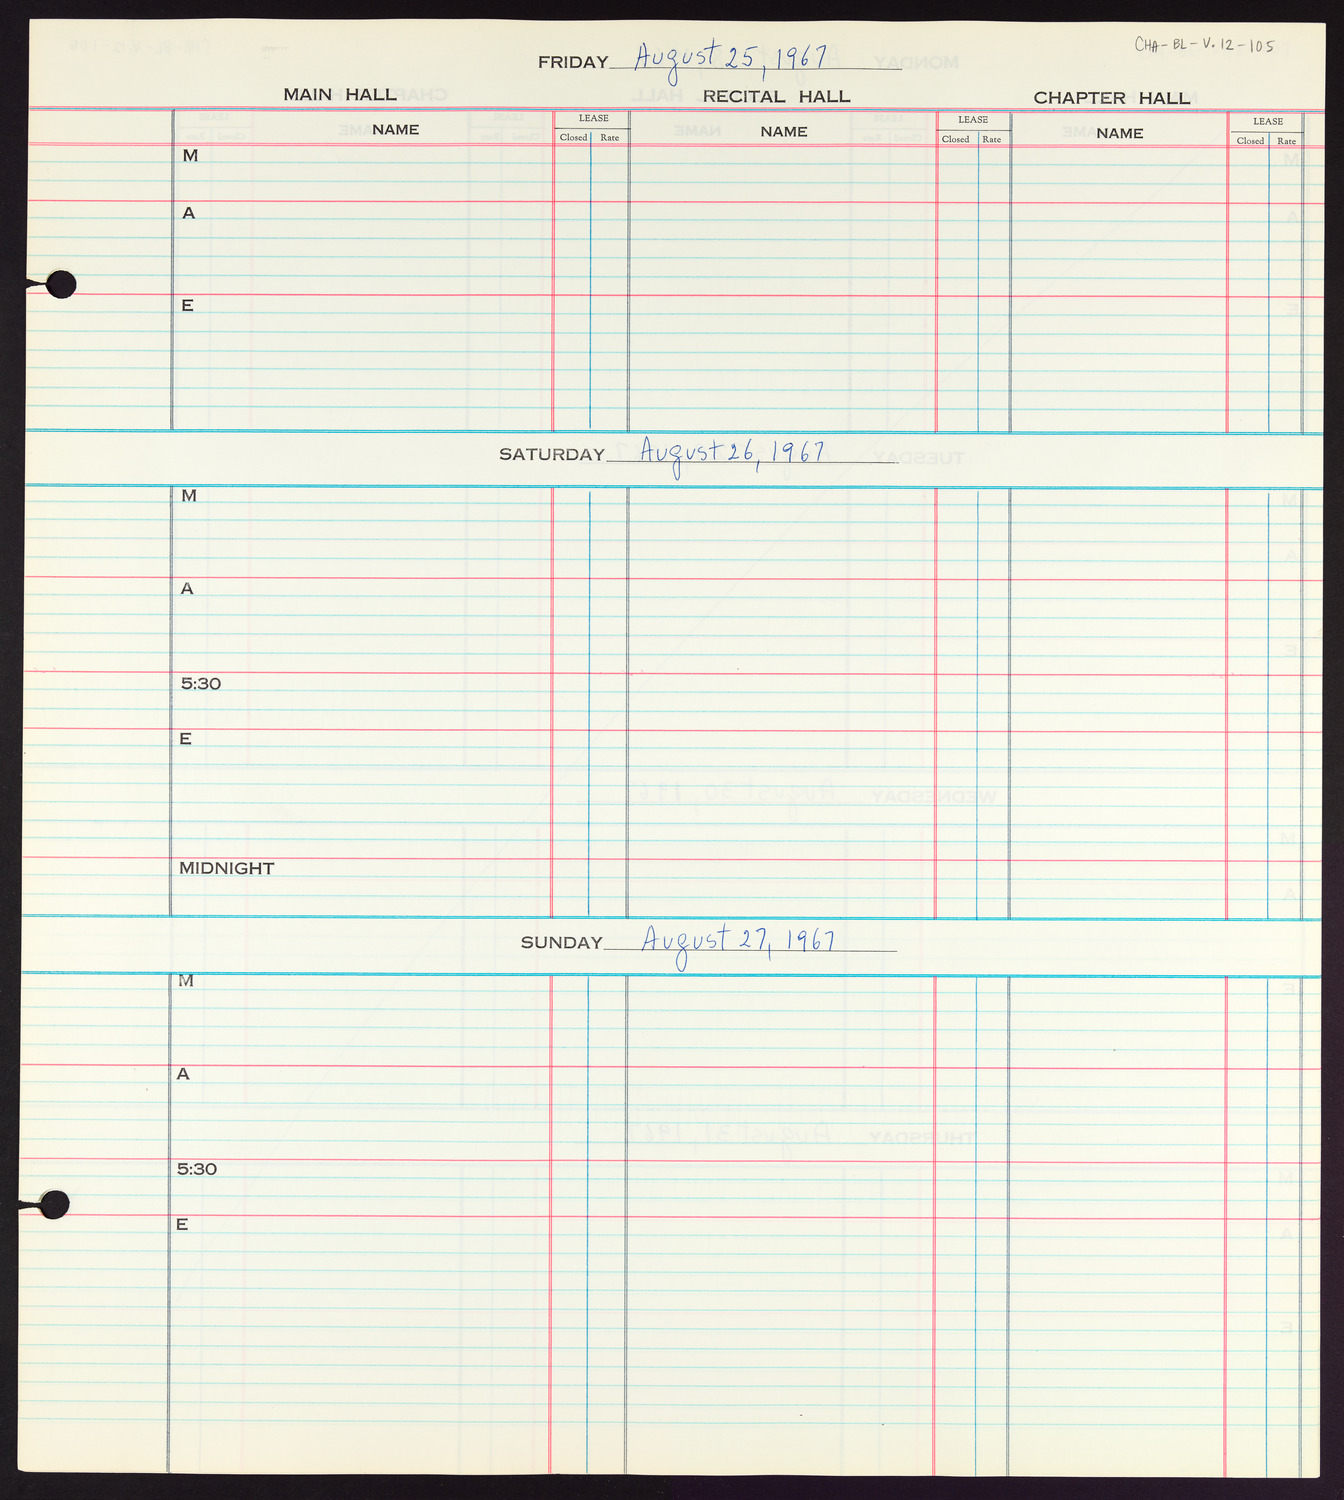 Carnegie Hall Booking Ledger, volume 12, page 105